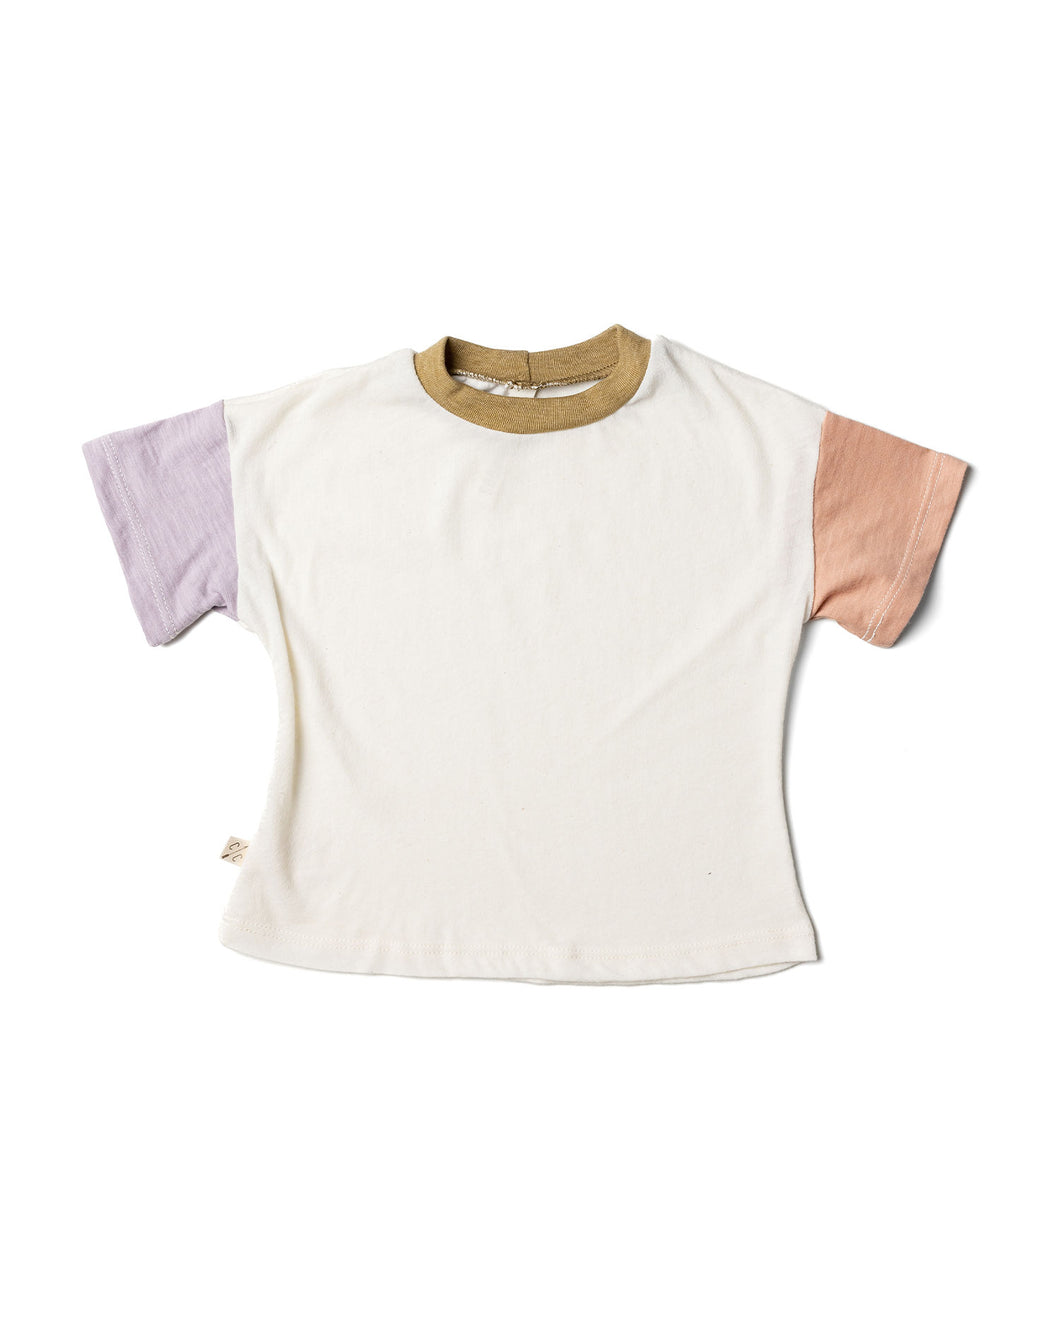 boxy tee - natural and ochre